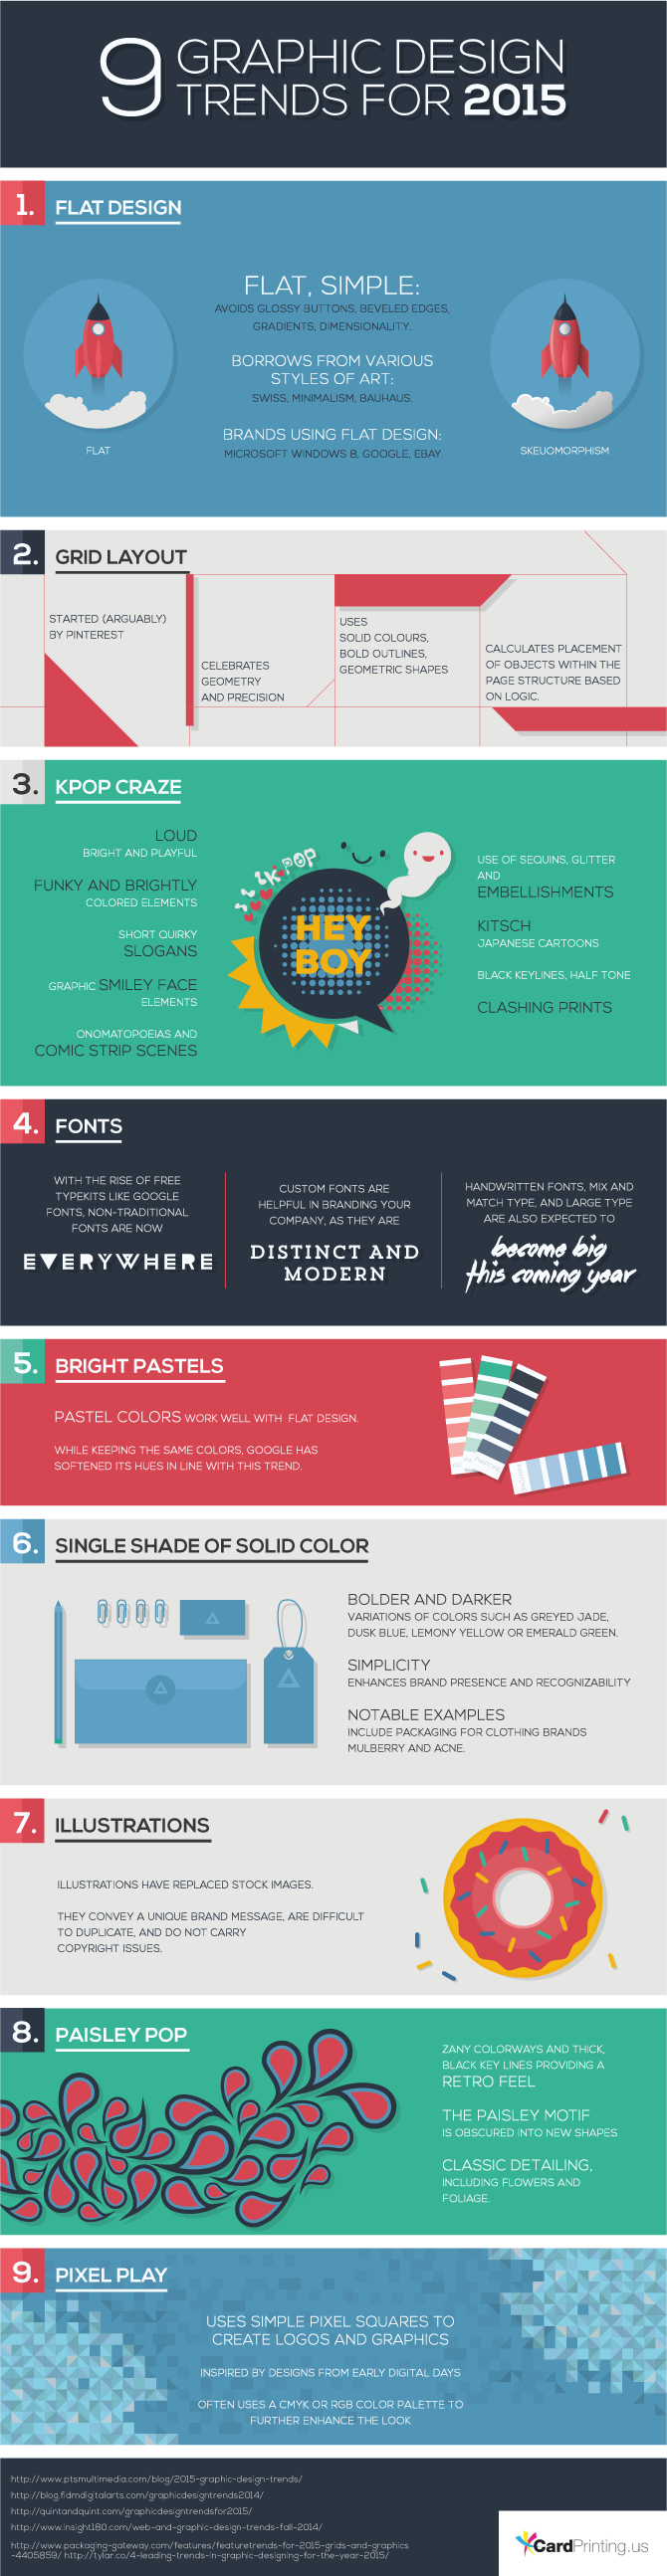 9 GRAPHIC DESIGN TRENDS FOR 2015